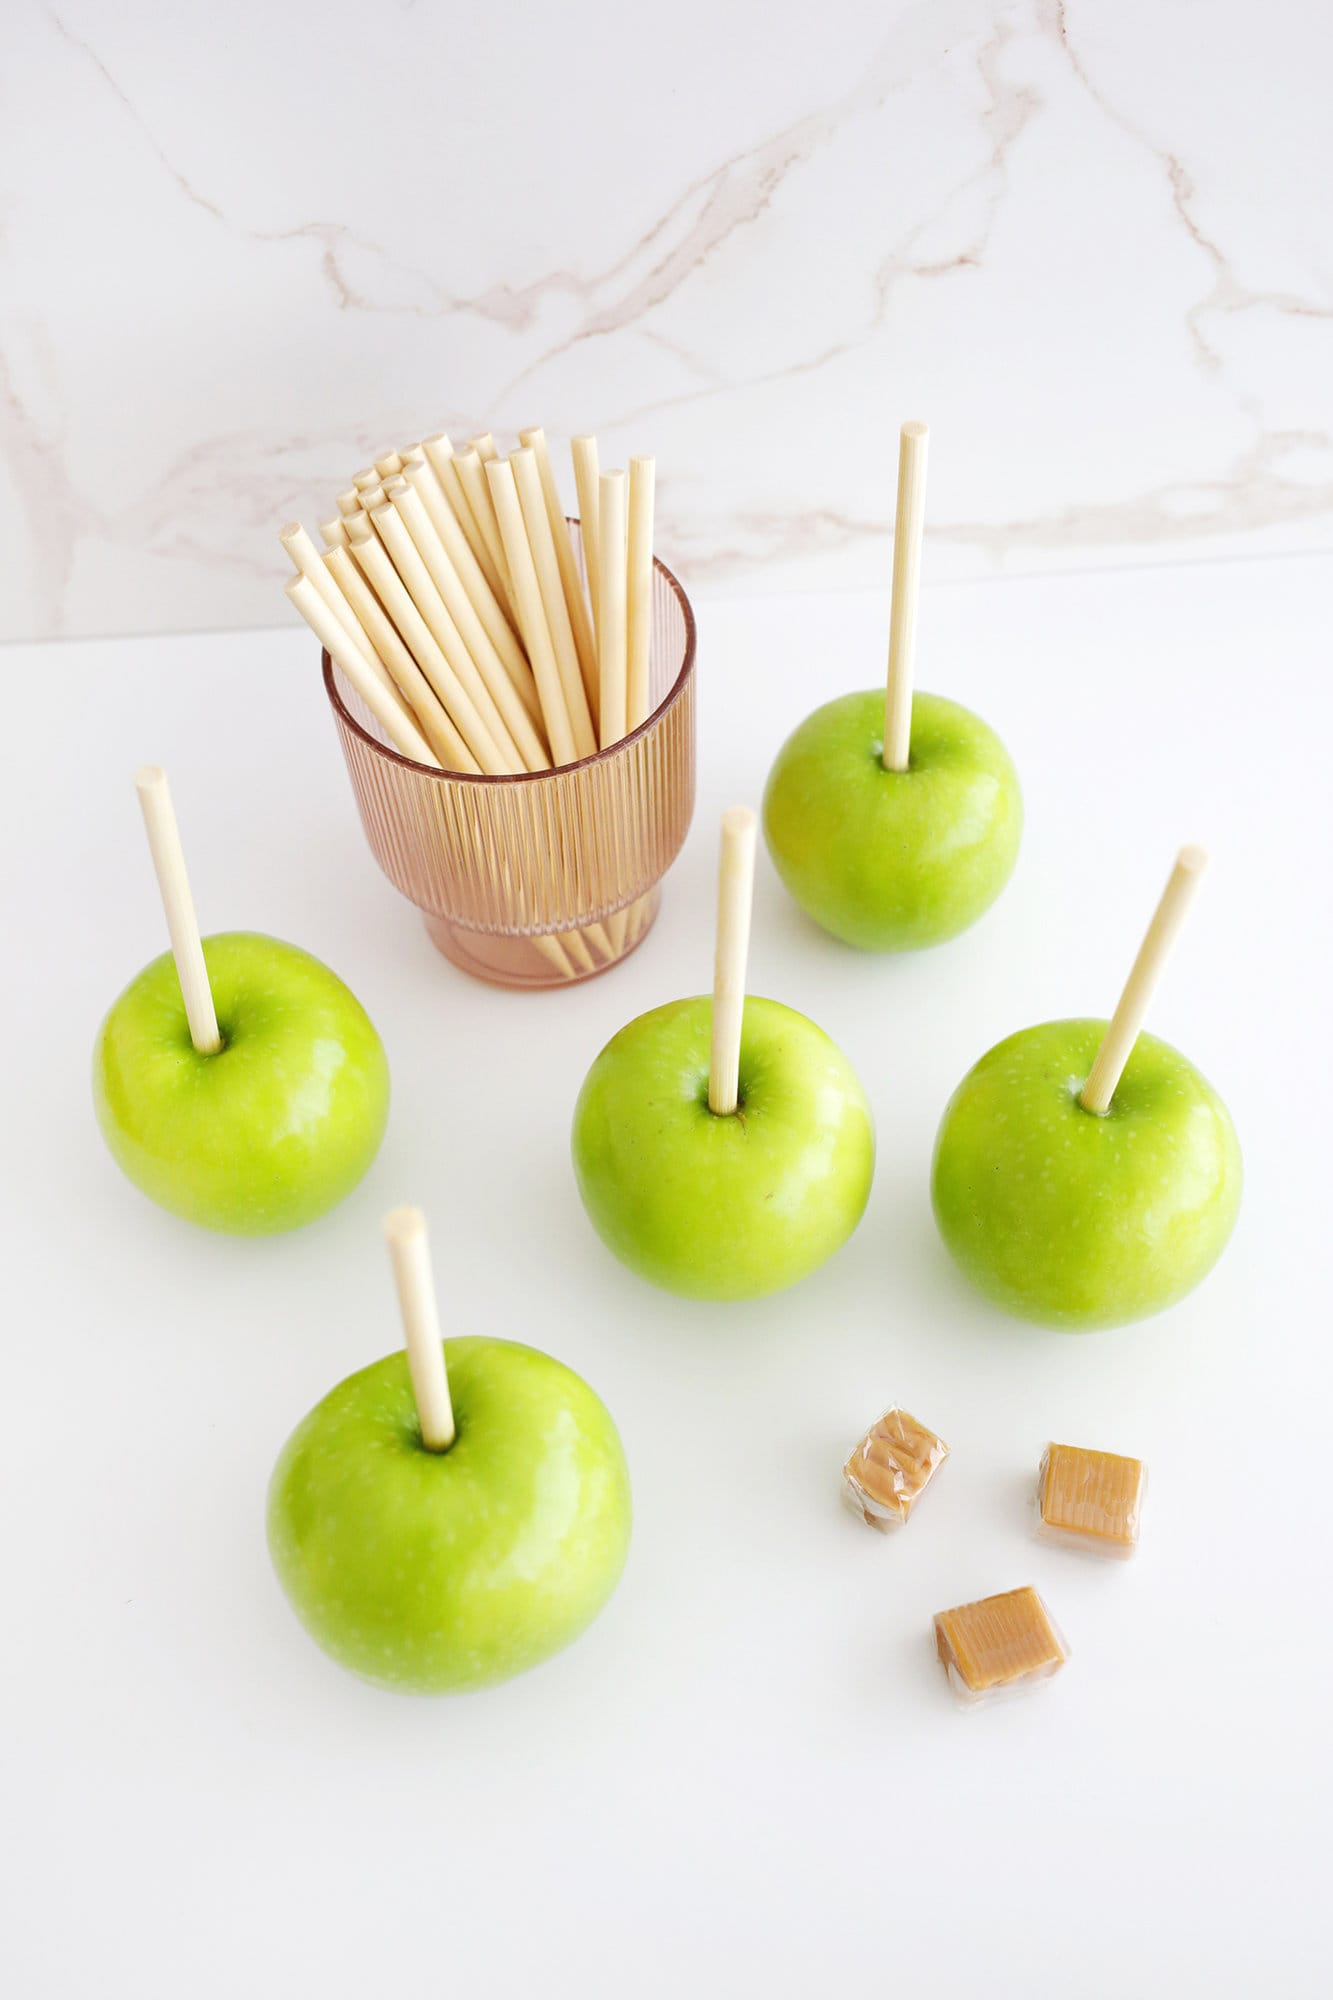 skewers added into apples for caramel apples